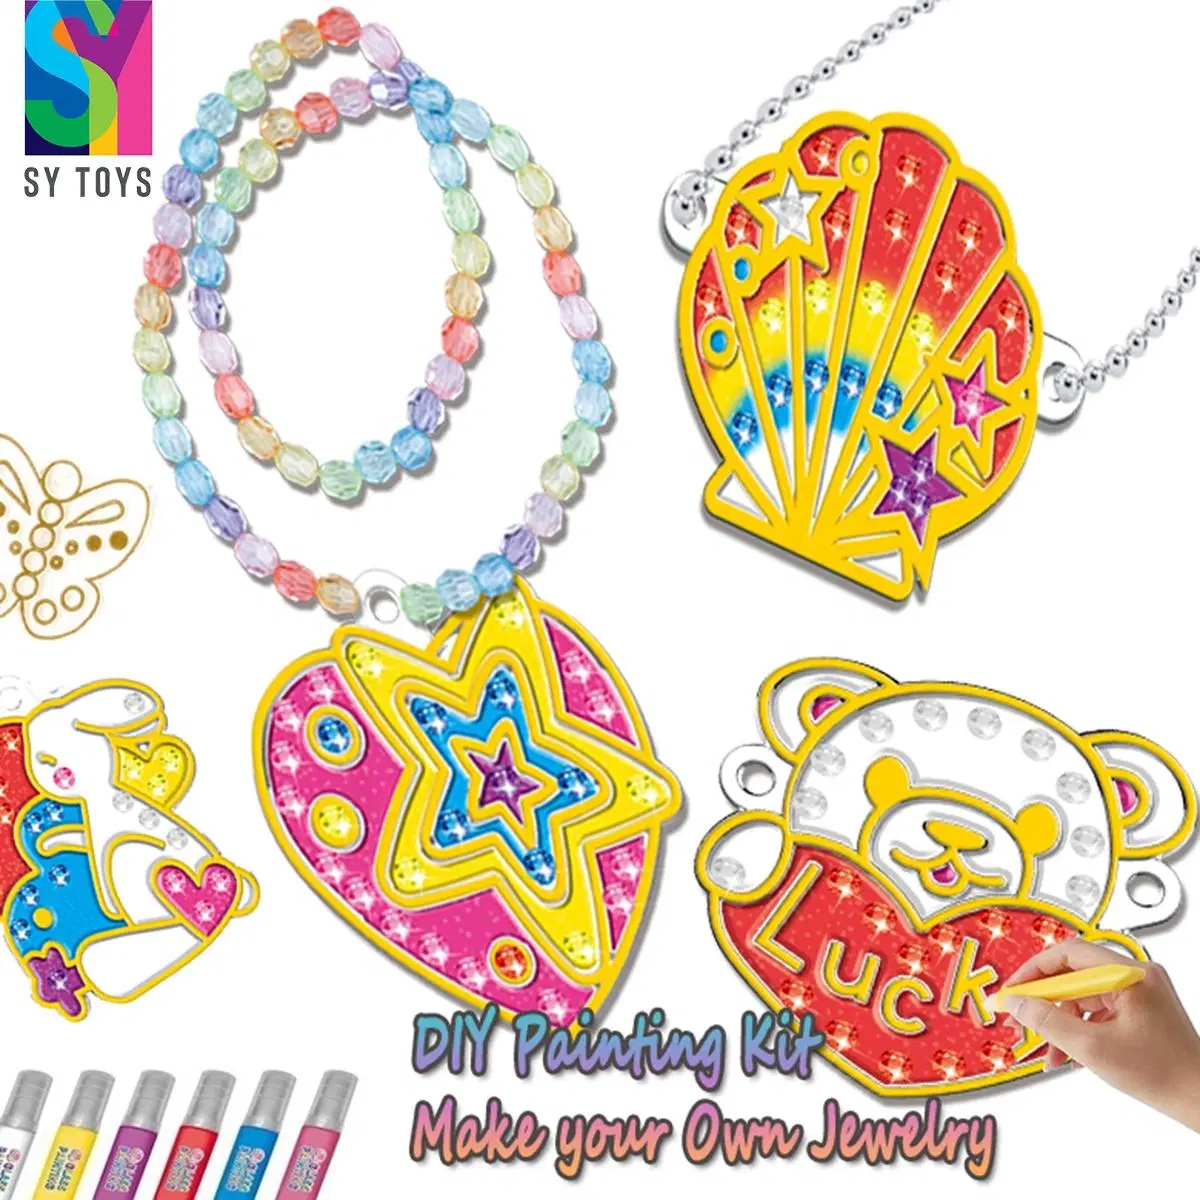 Sy DIY Toys for Kids Art and Craft Set Kids Art Set Painting Jewelry Girls Window Art Drawing Toys for Kids DIY Set